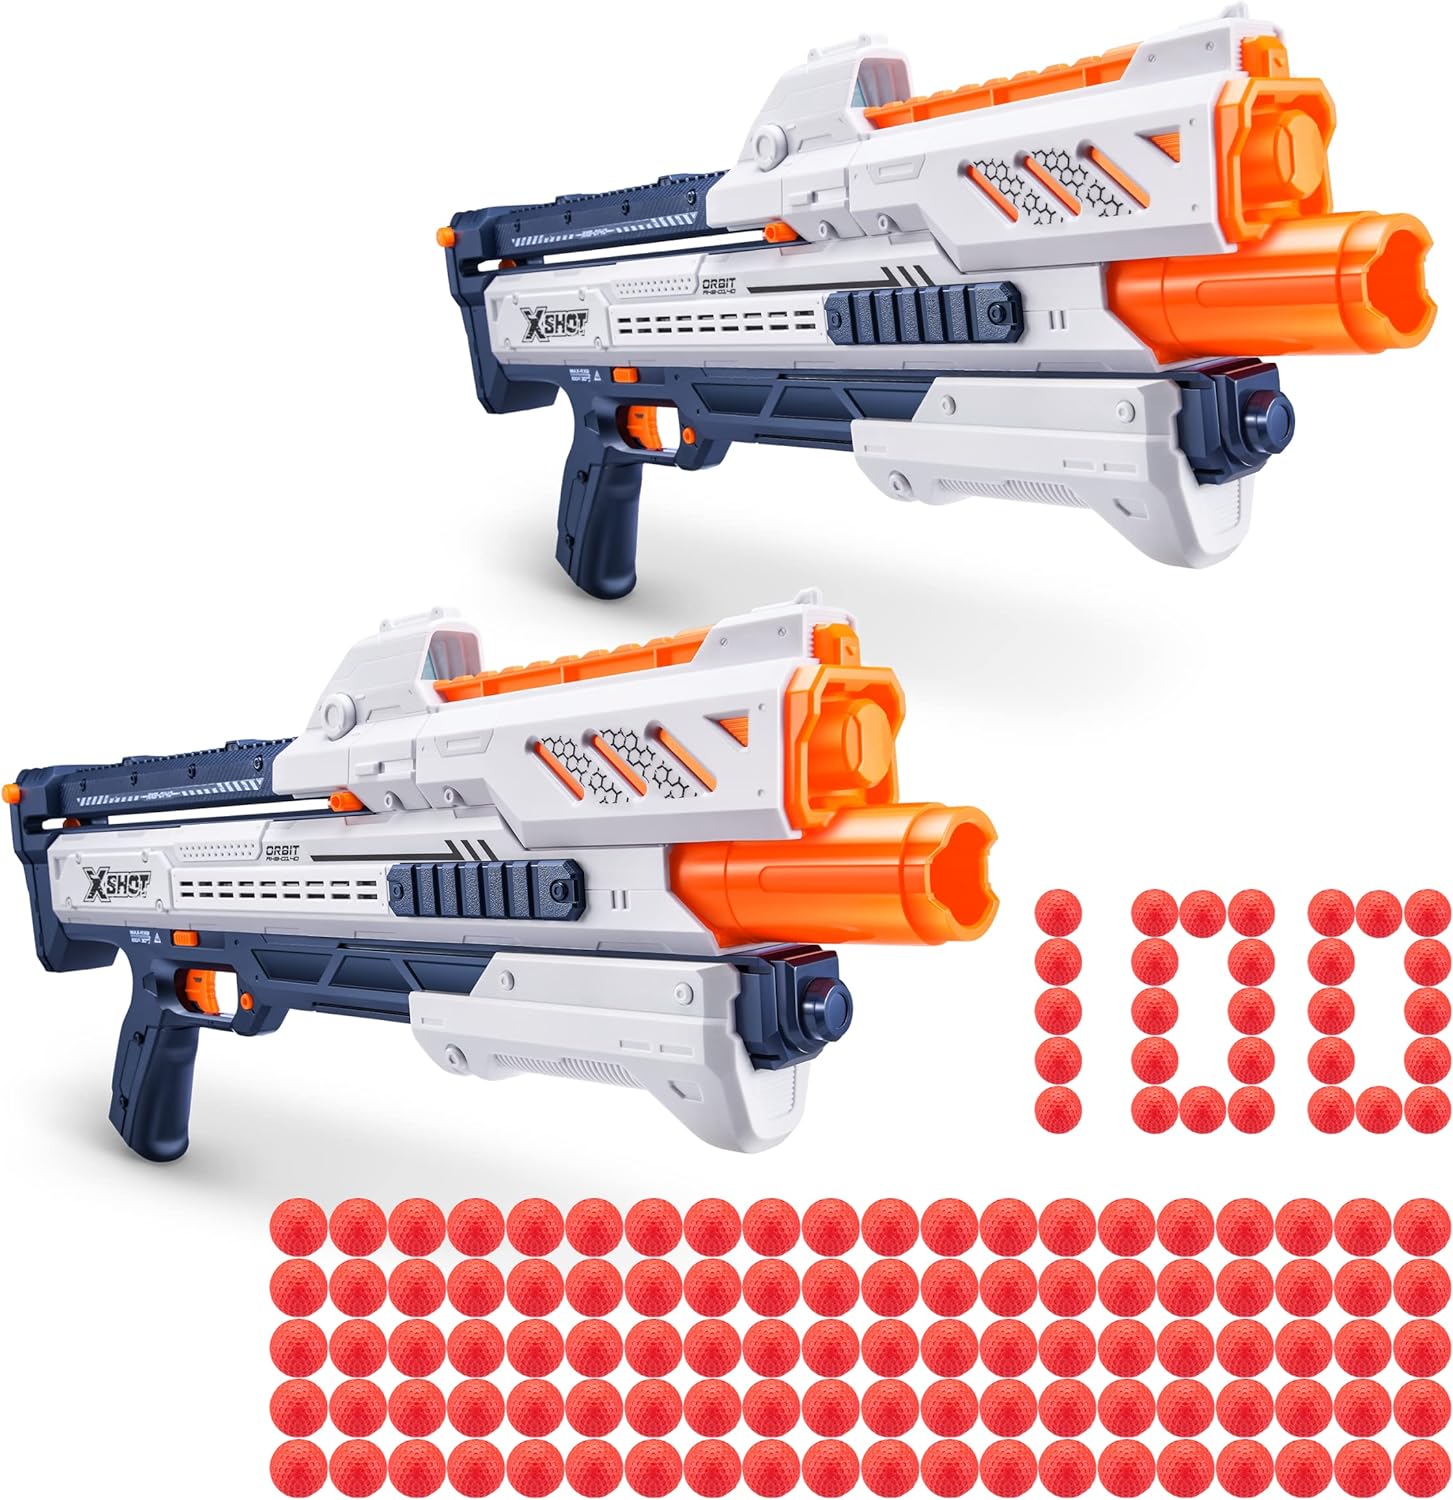 Chaos Orbit Blaster (2 Pack + 100 Darts) by ZURU, X-Shot White Dart Ball Blaster, Toy Blaster, Easy Reload, Rapid Fire Power, Quick Fast Reload, Toys for Kids, Boys, Teens, Adults (White)